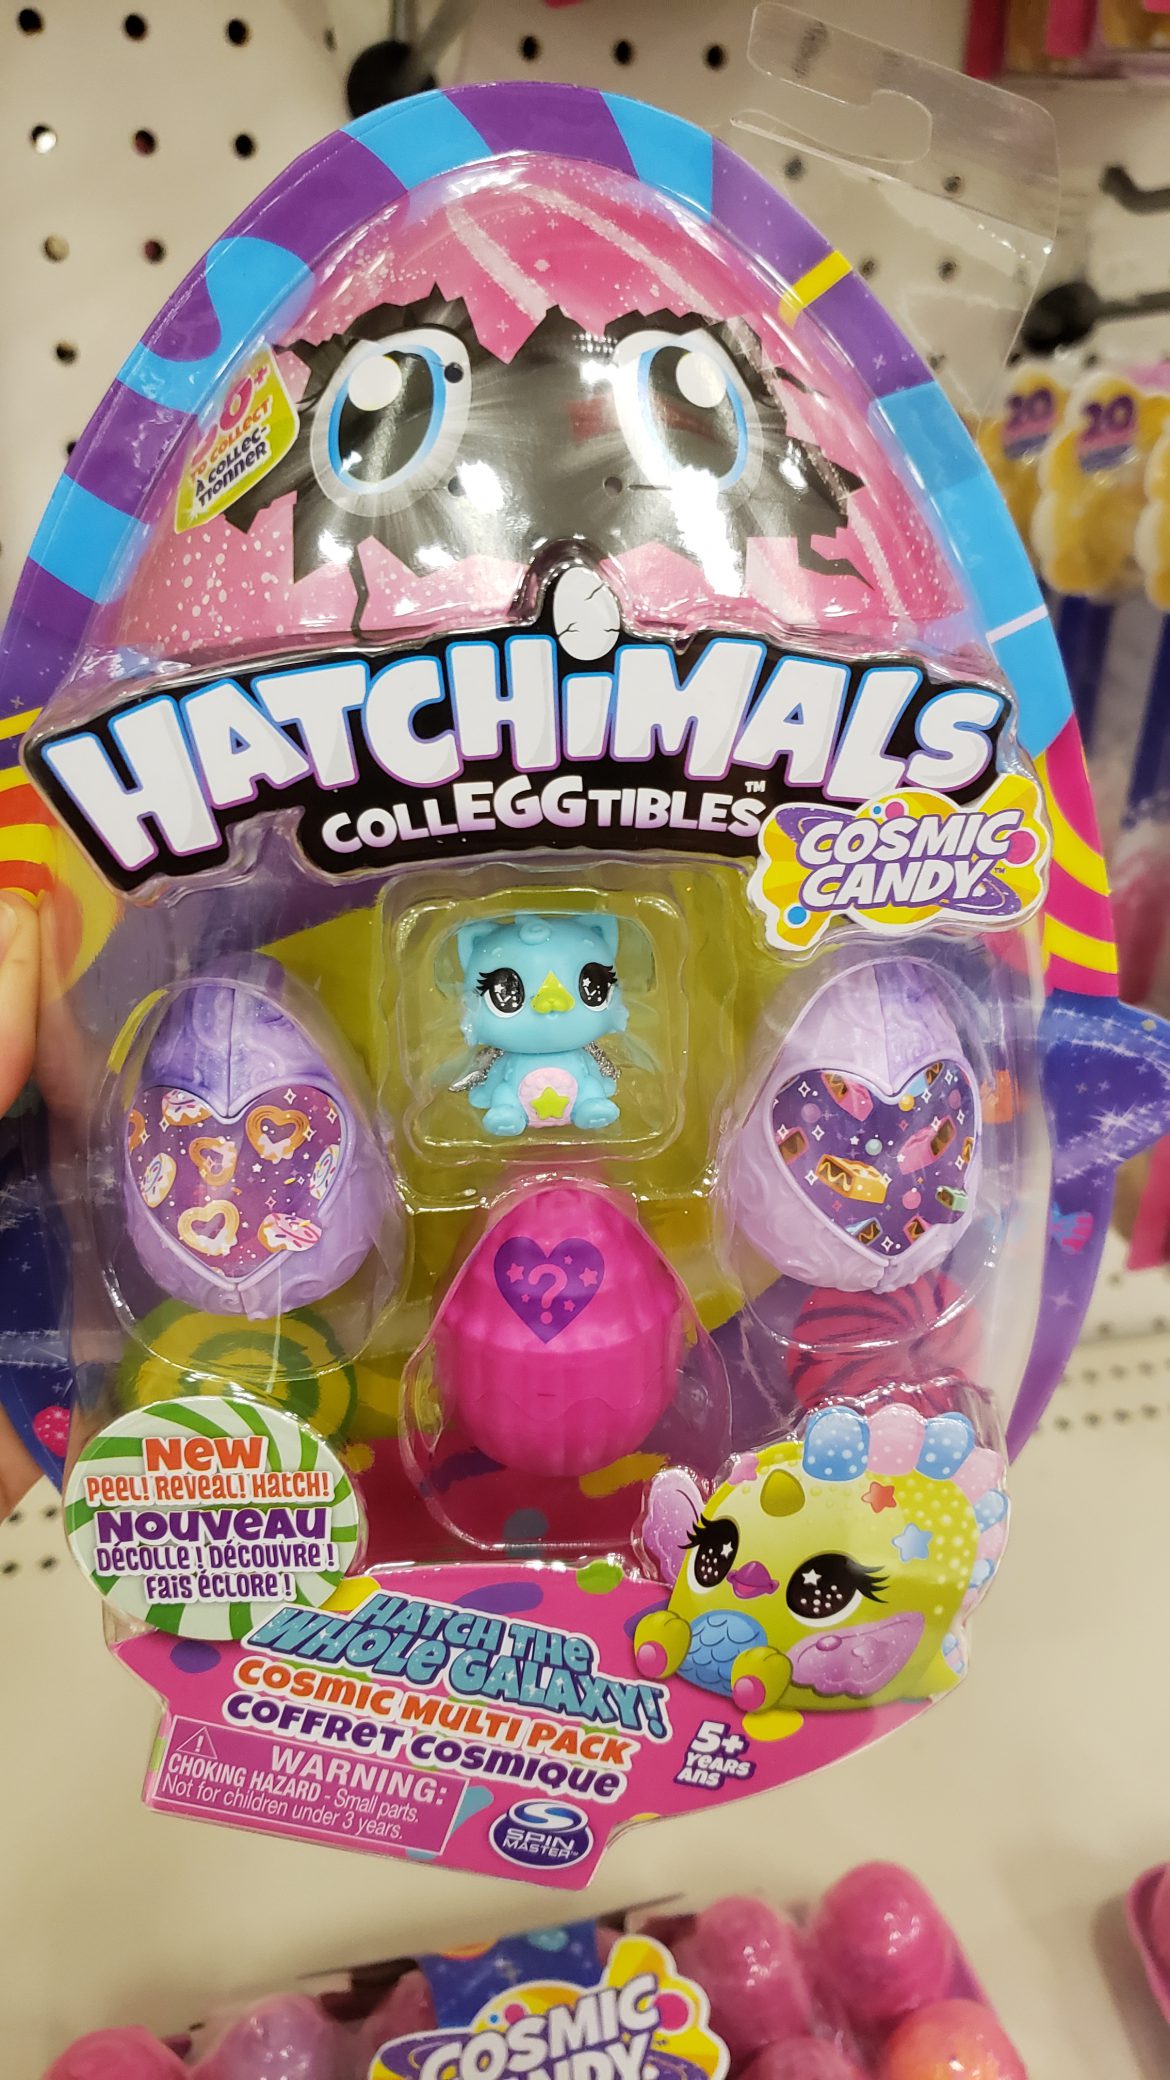 Hatchimals Colleggtibles Cosmic Candy Spotted at Target